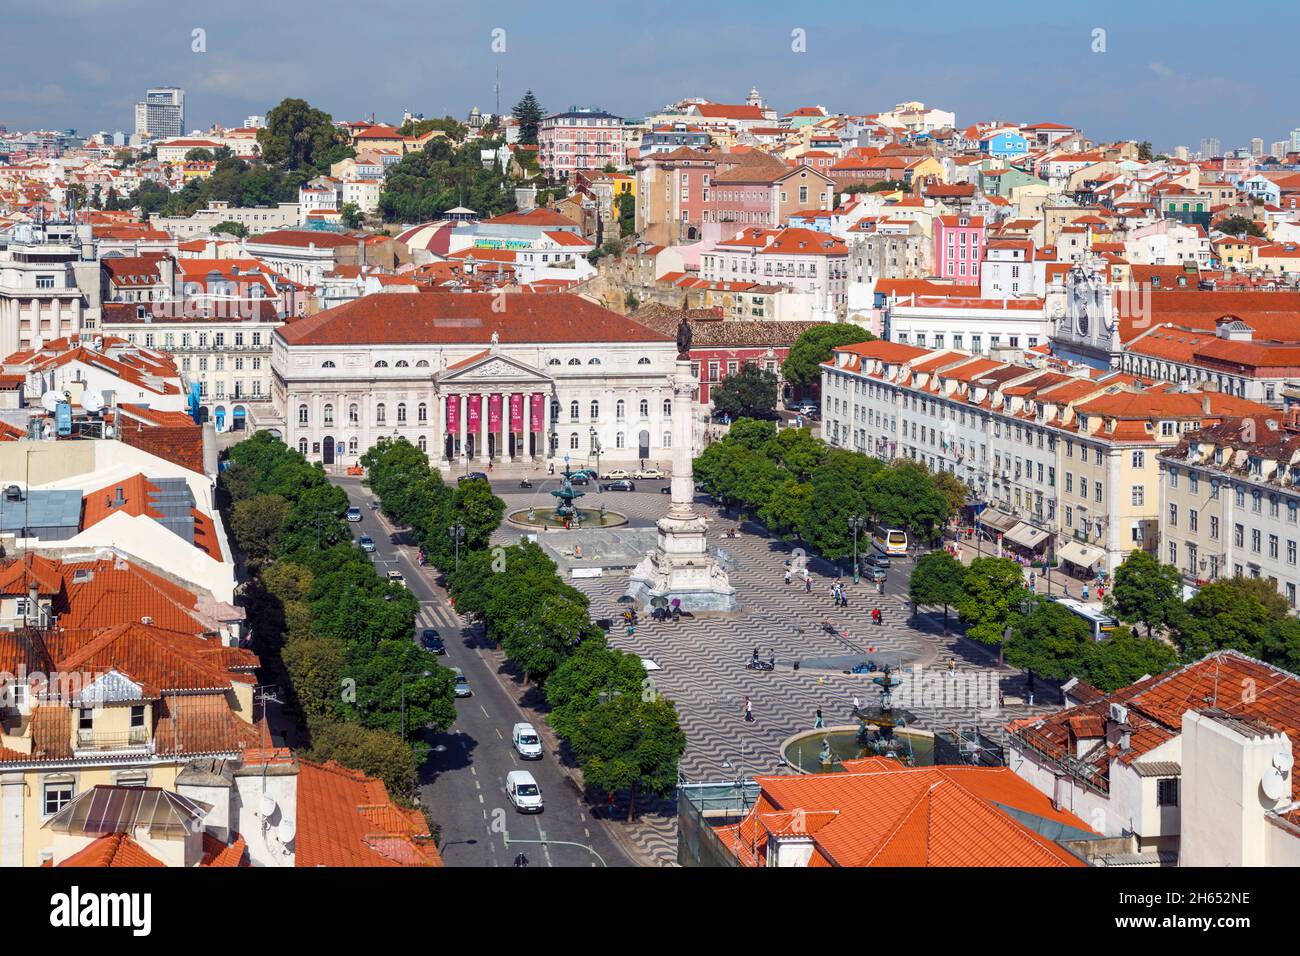 Lisbon, Portugal. Praca Dom Pedro IV, commonly known as Rossio.  The white building is the National Theatre, Teatro Nacional Dona Maria II.  The colum Stock Photo